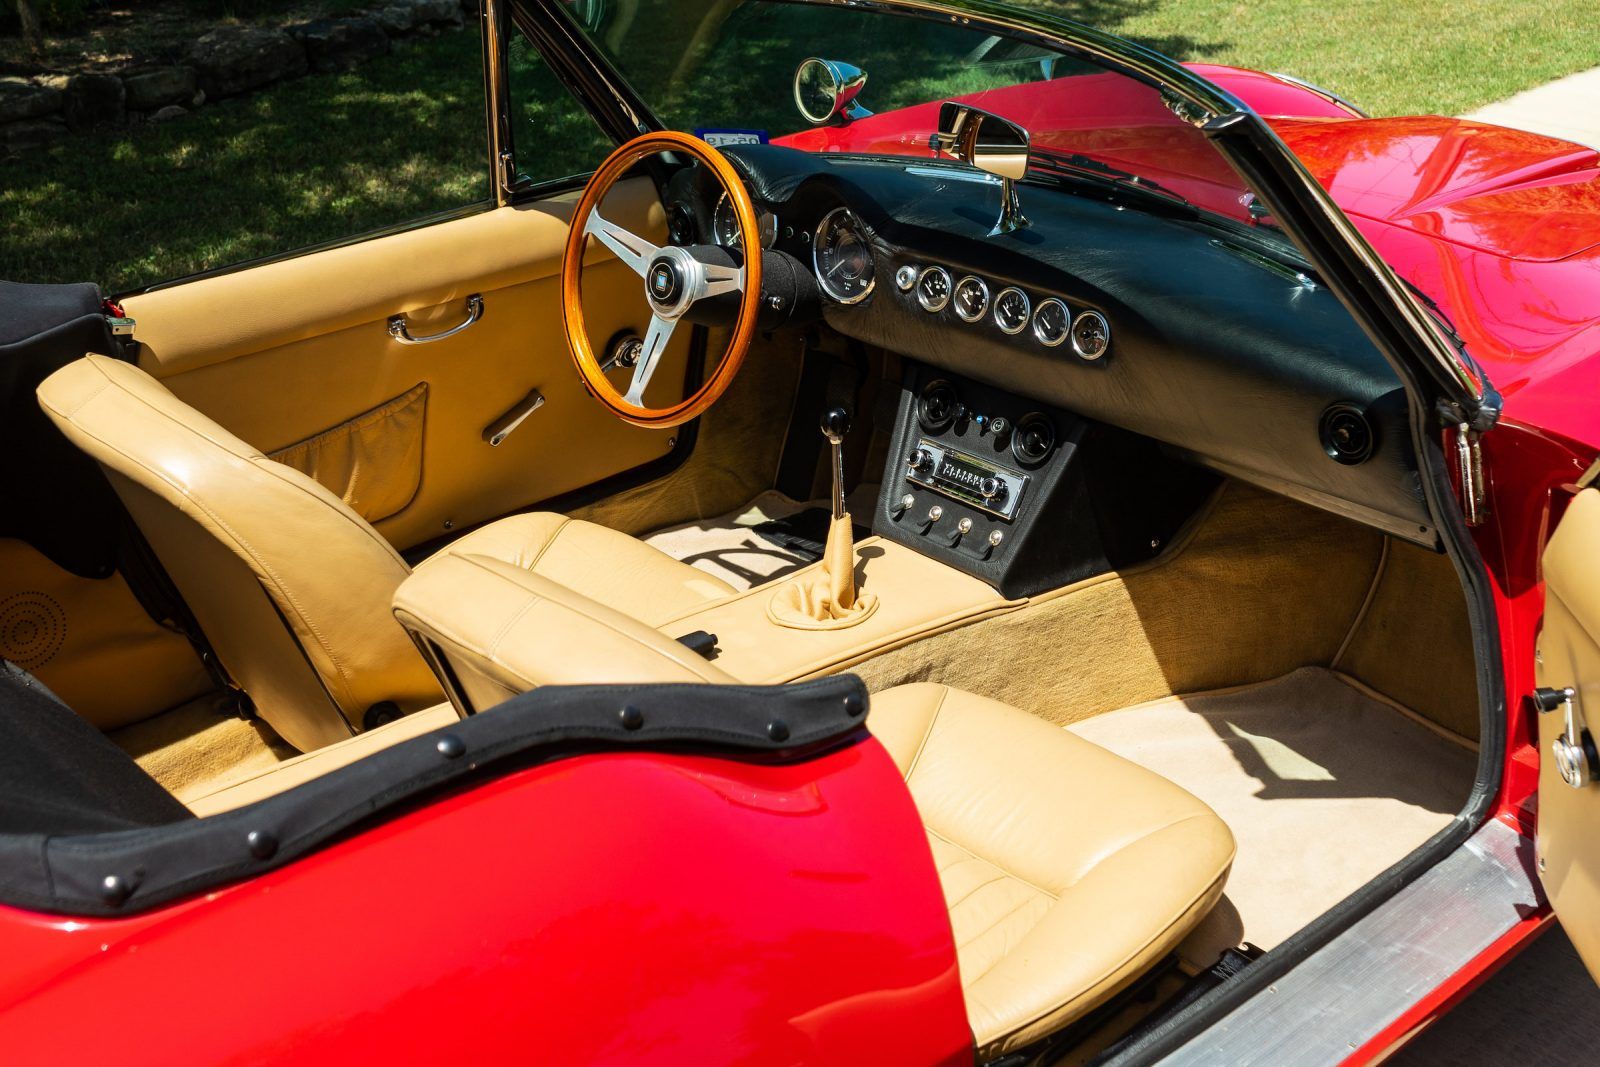 The seating of the Modena GT Spyder, a car used in the movie Ferris Bueller's Day Off.